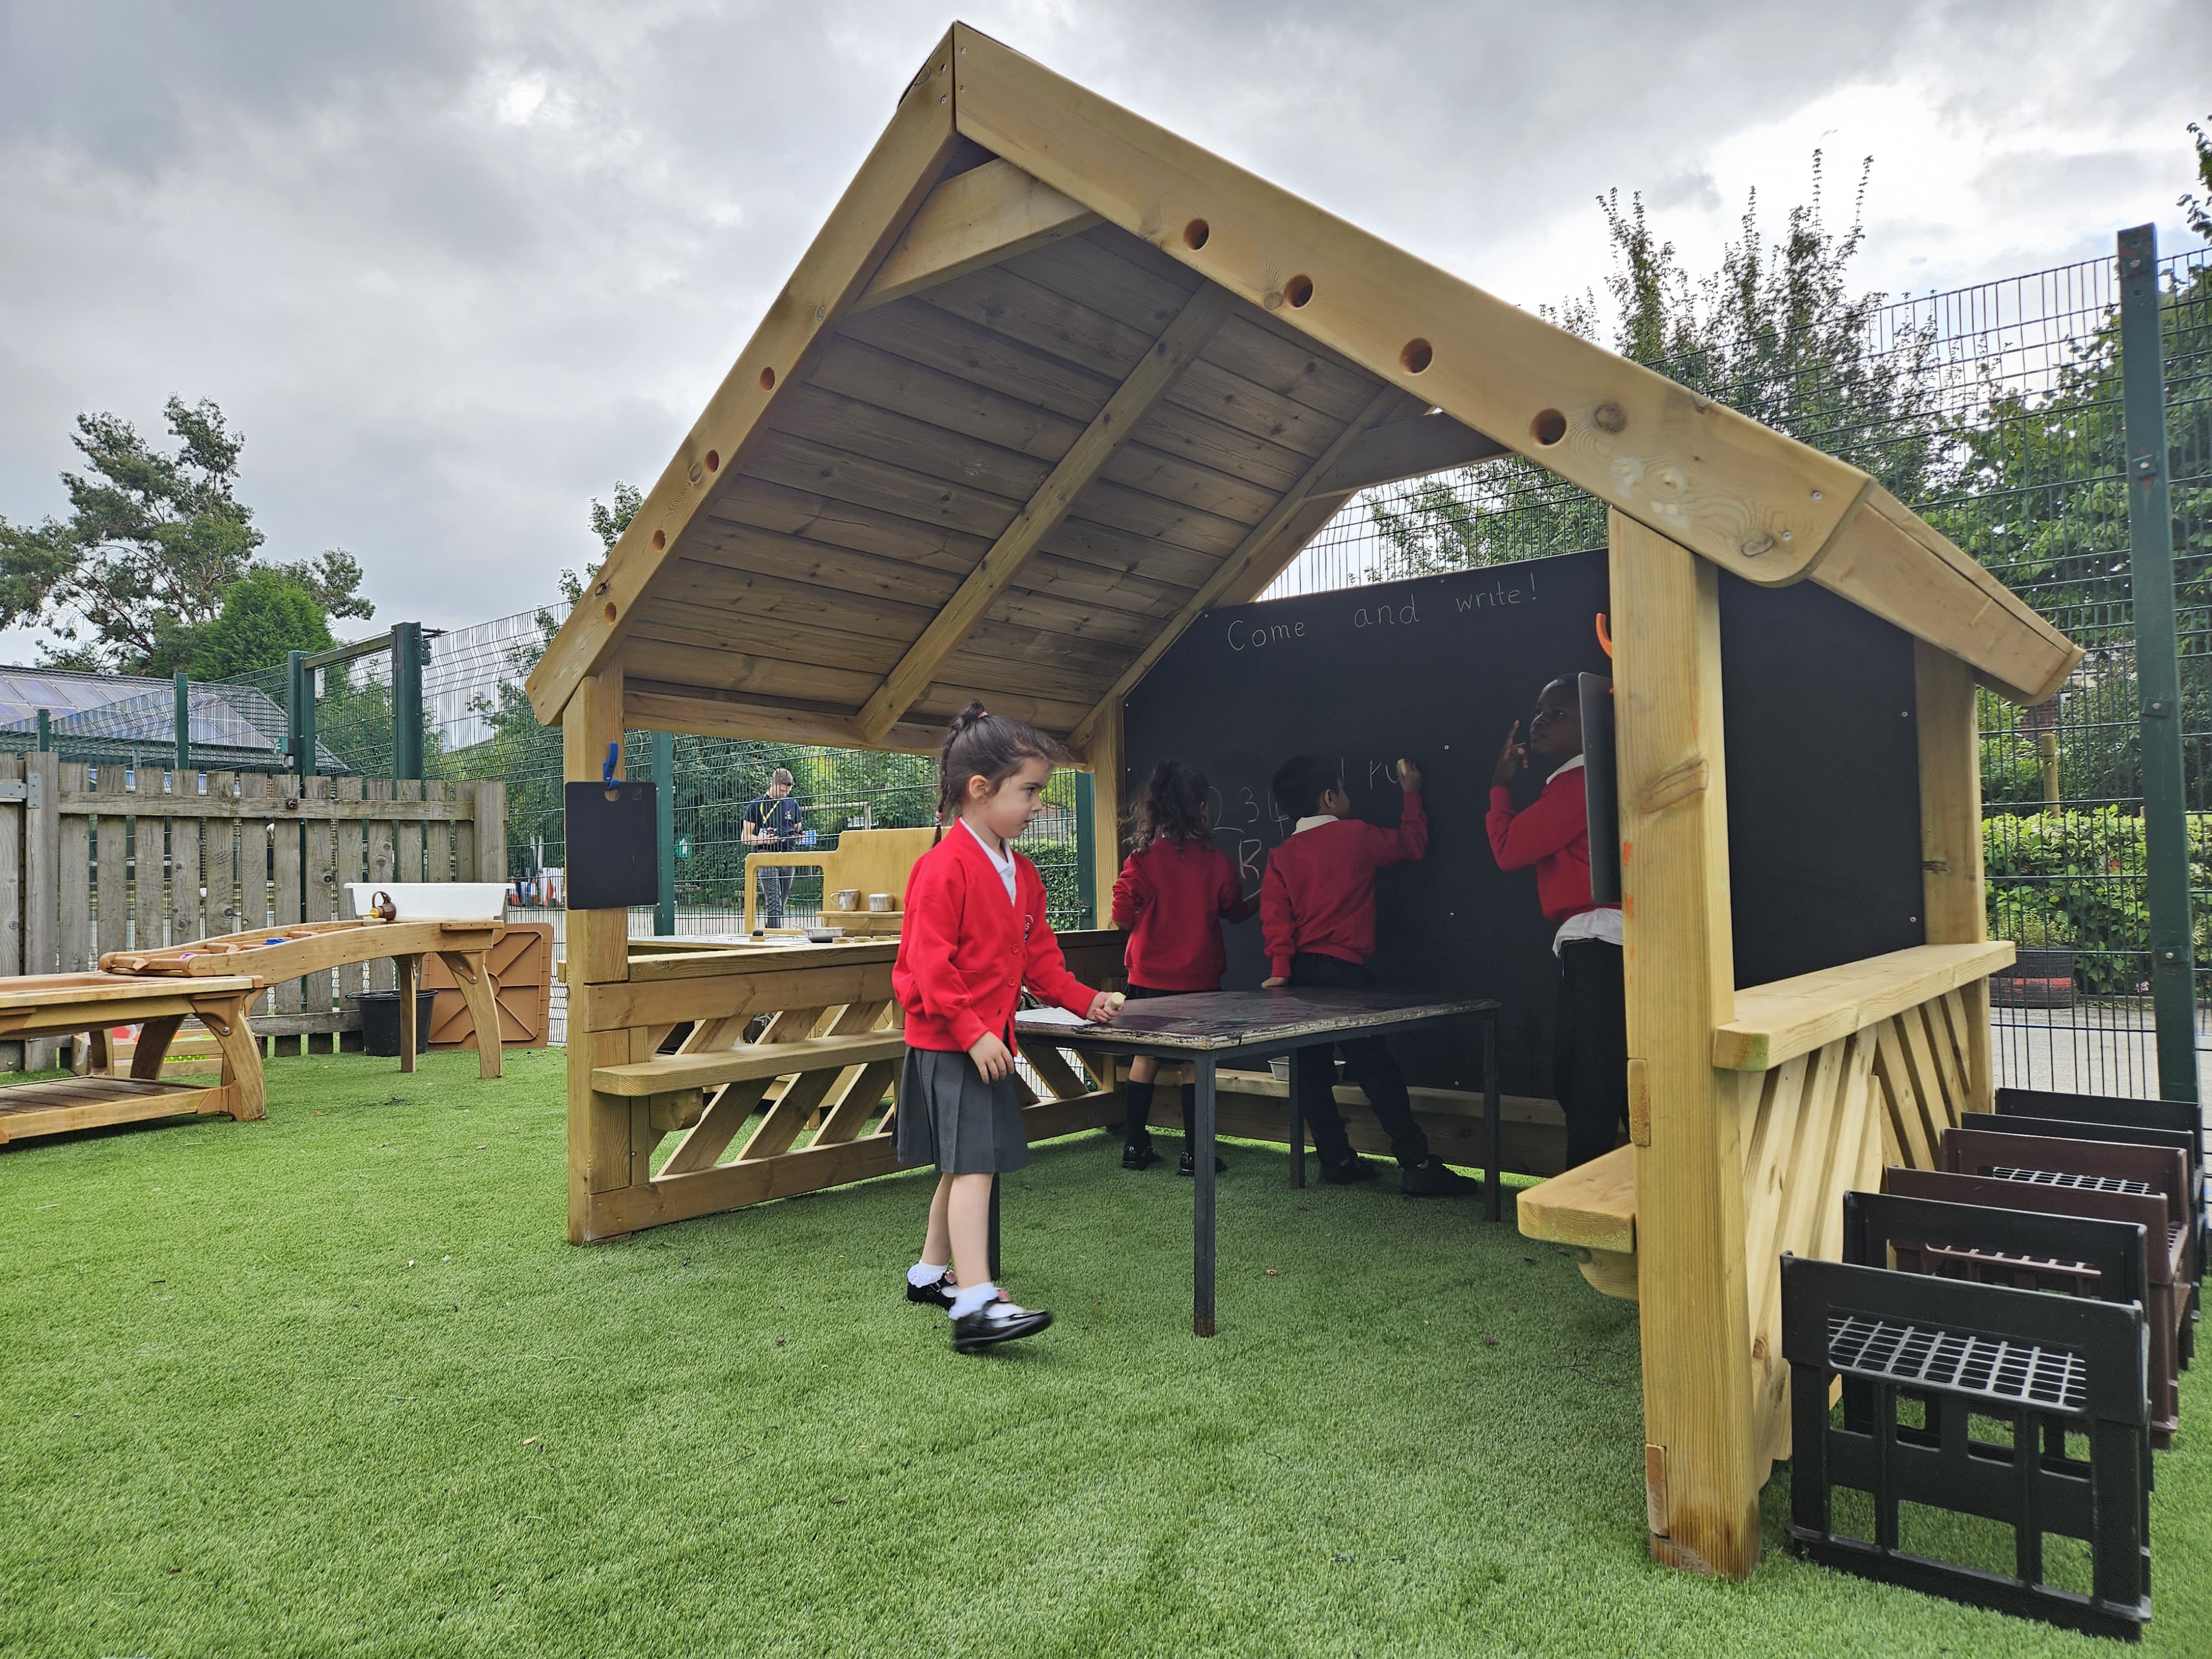 4 children are underneath the Giant Playhouse and are writing on the big chalkboard in the background. The Giant Playhouse is on top of an artificial grass surface.